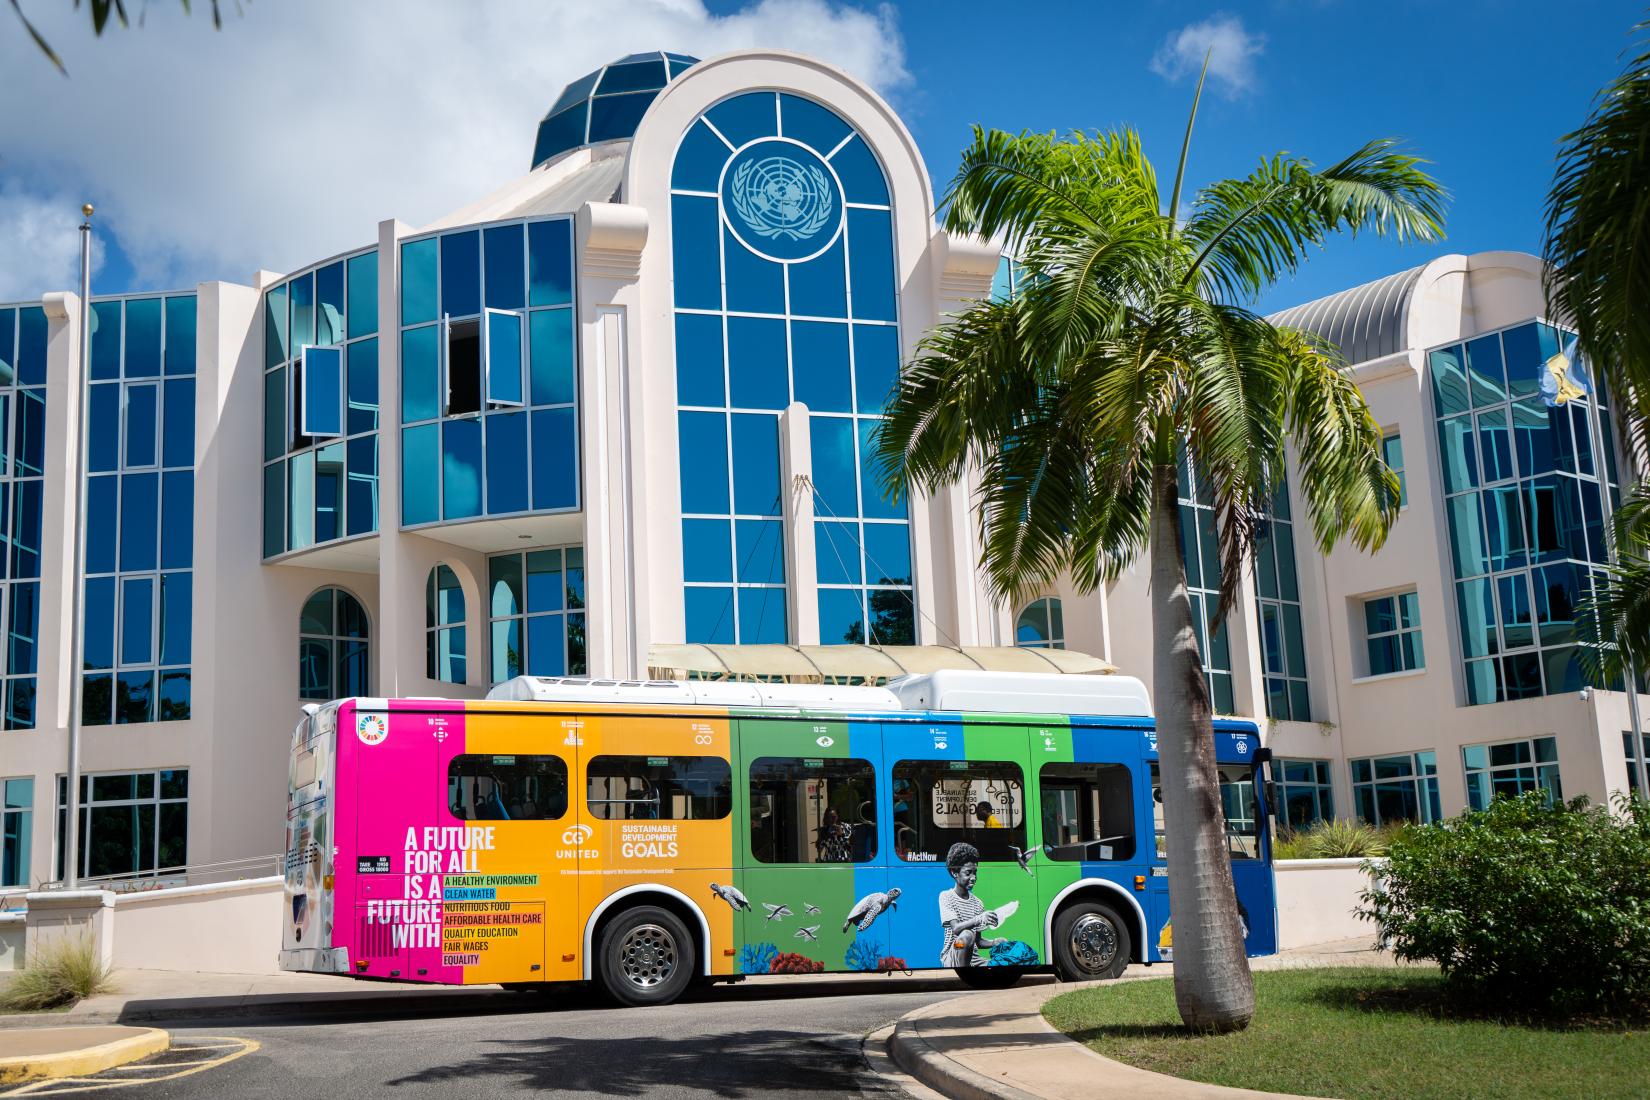 The SDG branded Electric Bus parked at the entrance of UN House Barbados.  